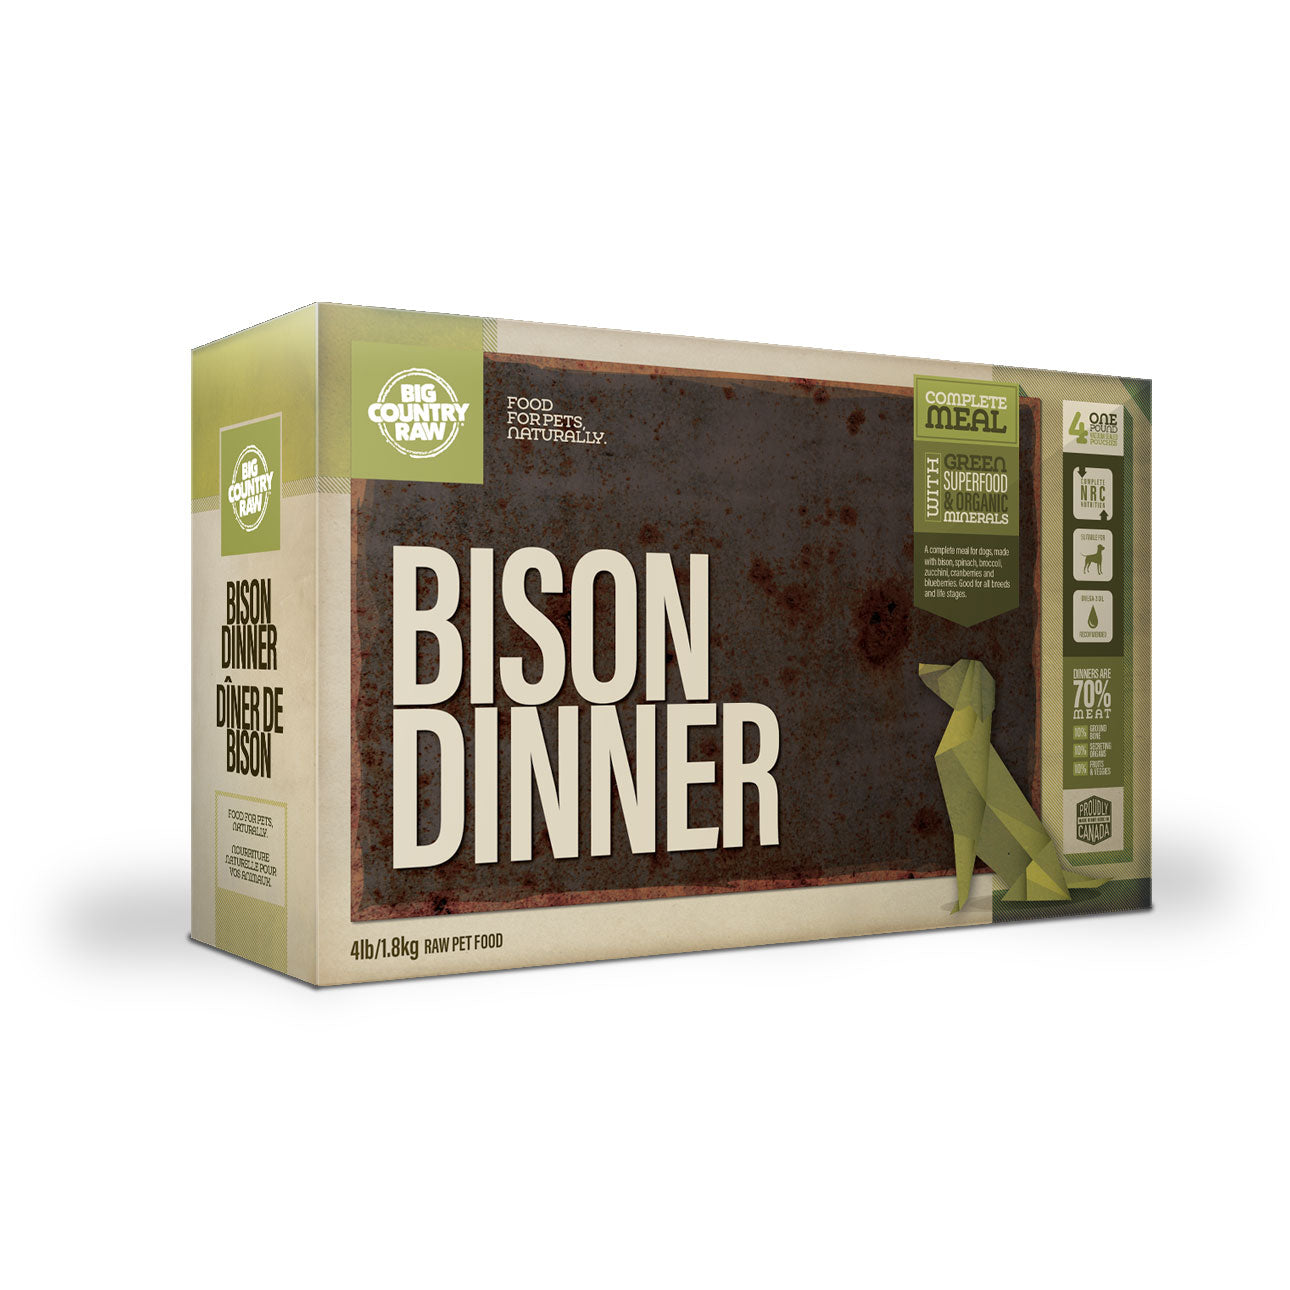 BIG COUNTRY RAW DINNER CARTON - BISON